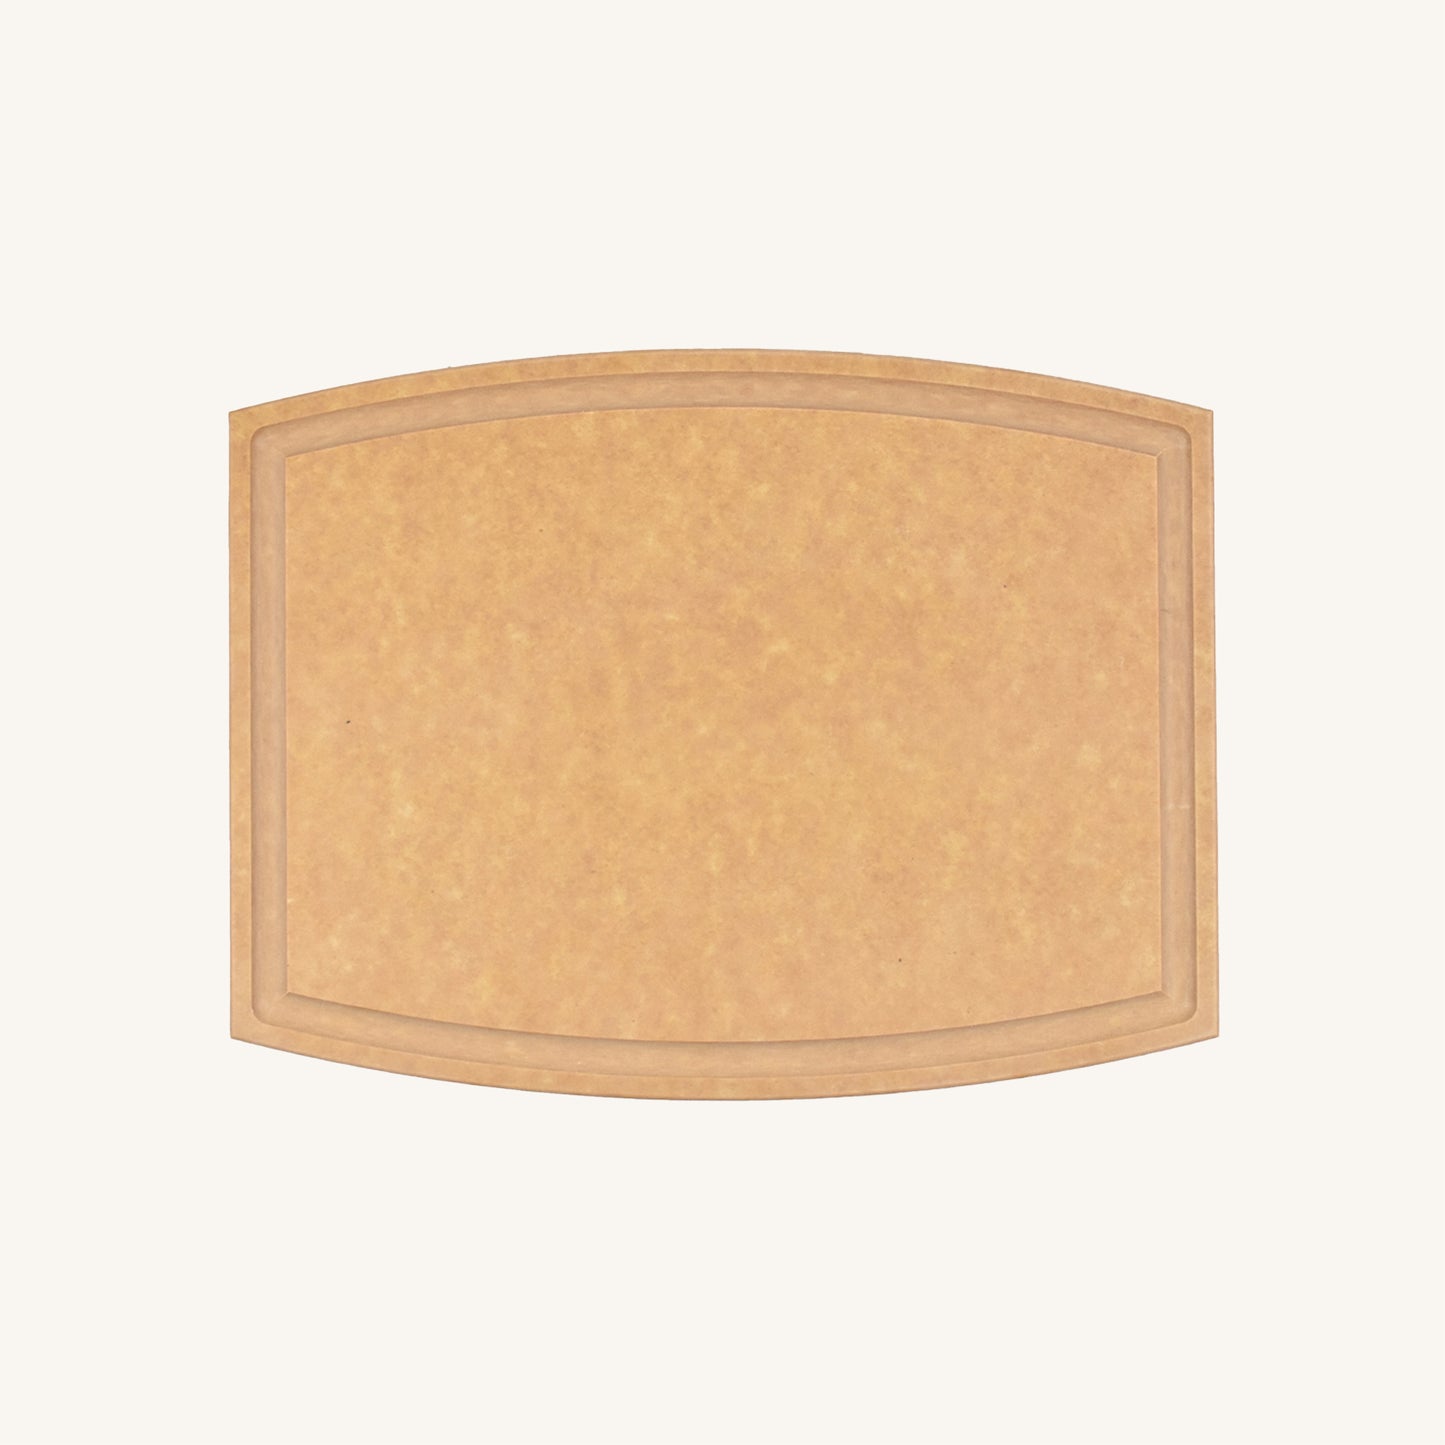 Dishwasher Safe Arched Cutting Board with Juice Groove